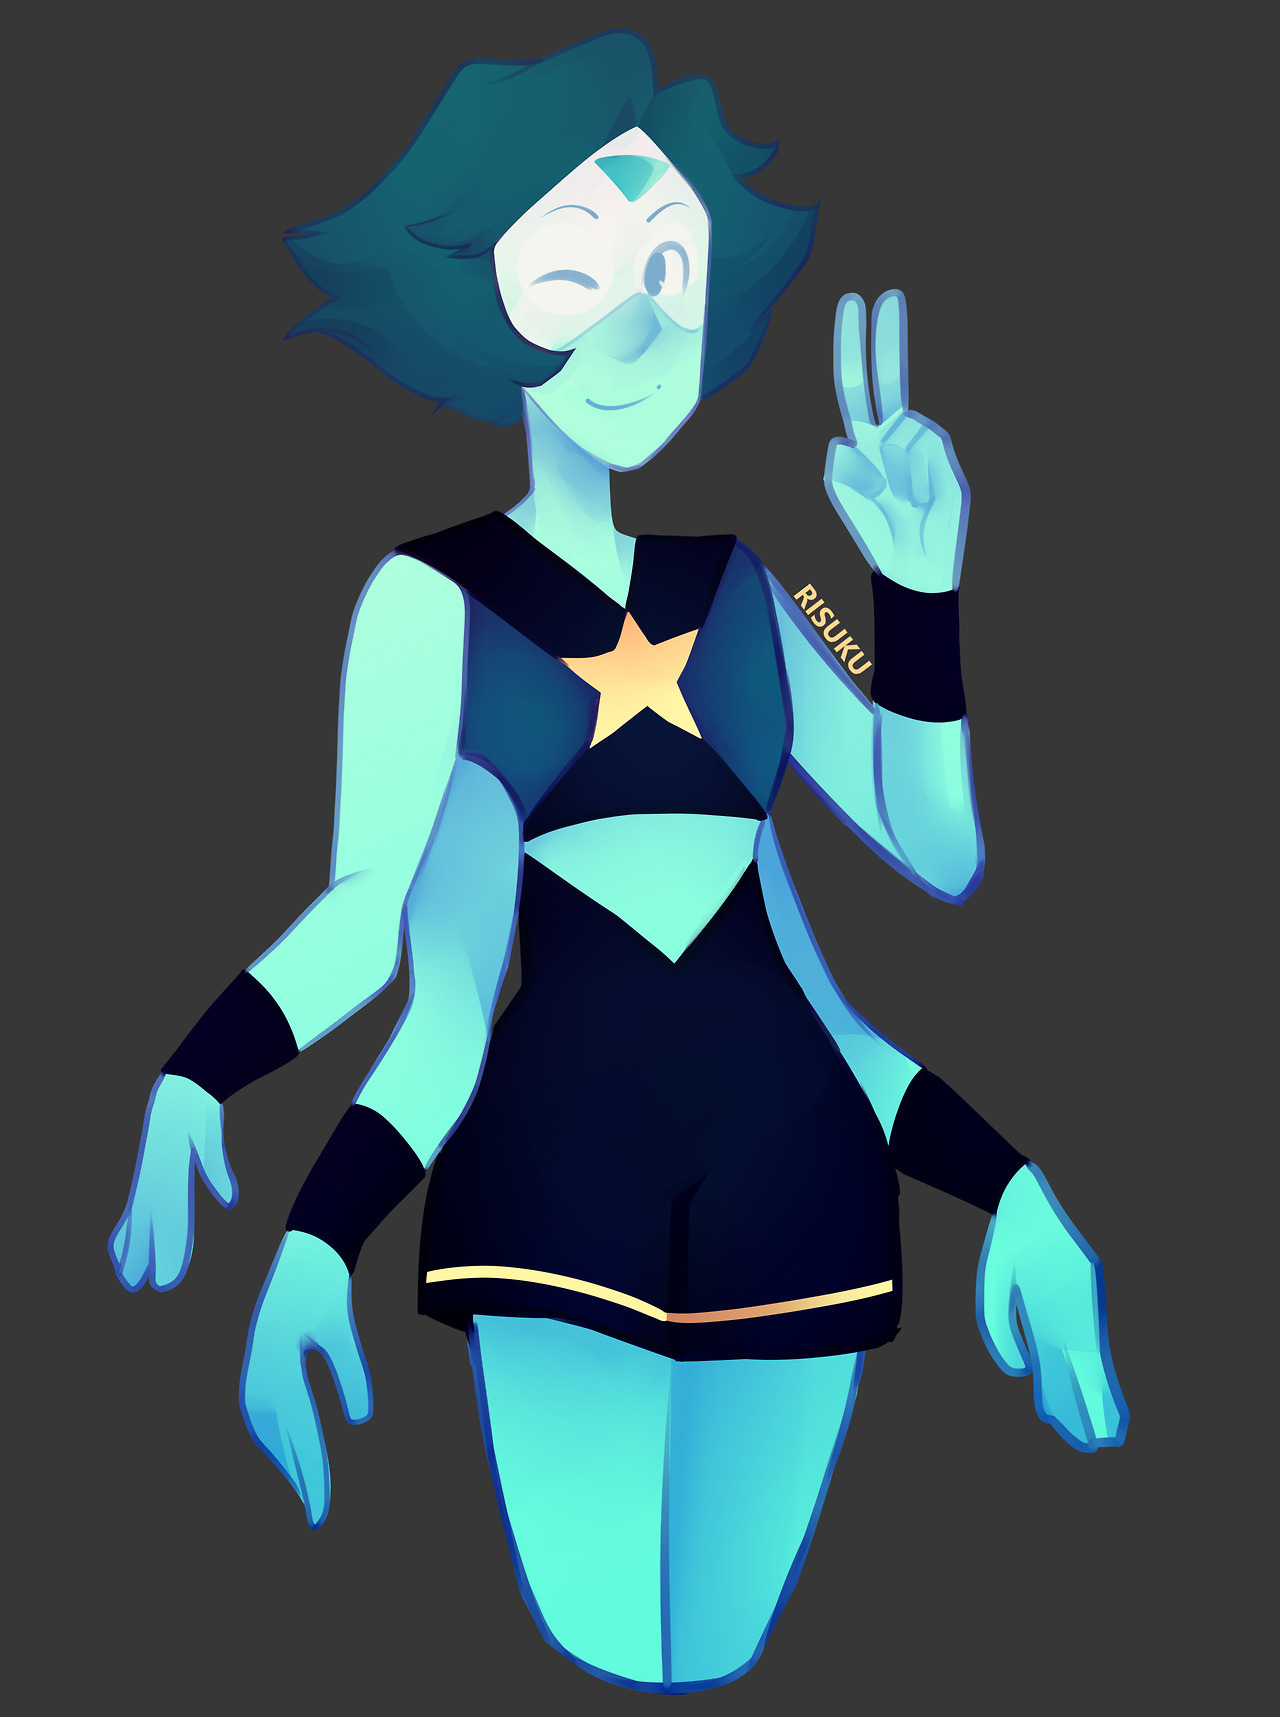 I had done some ‘painting’ practice using a Lapidot fusion designed by @artifiziell before